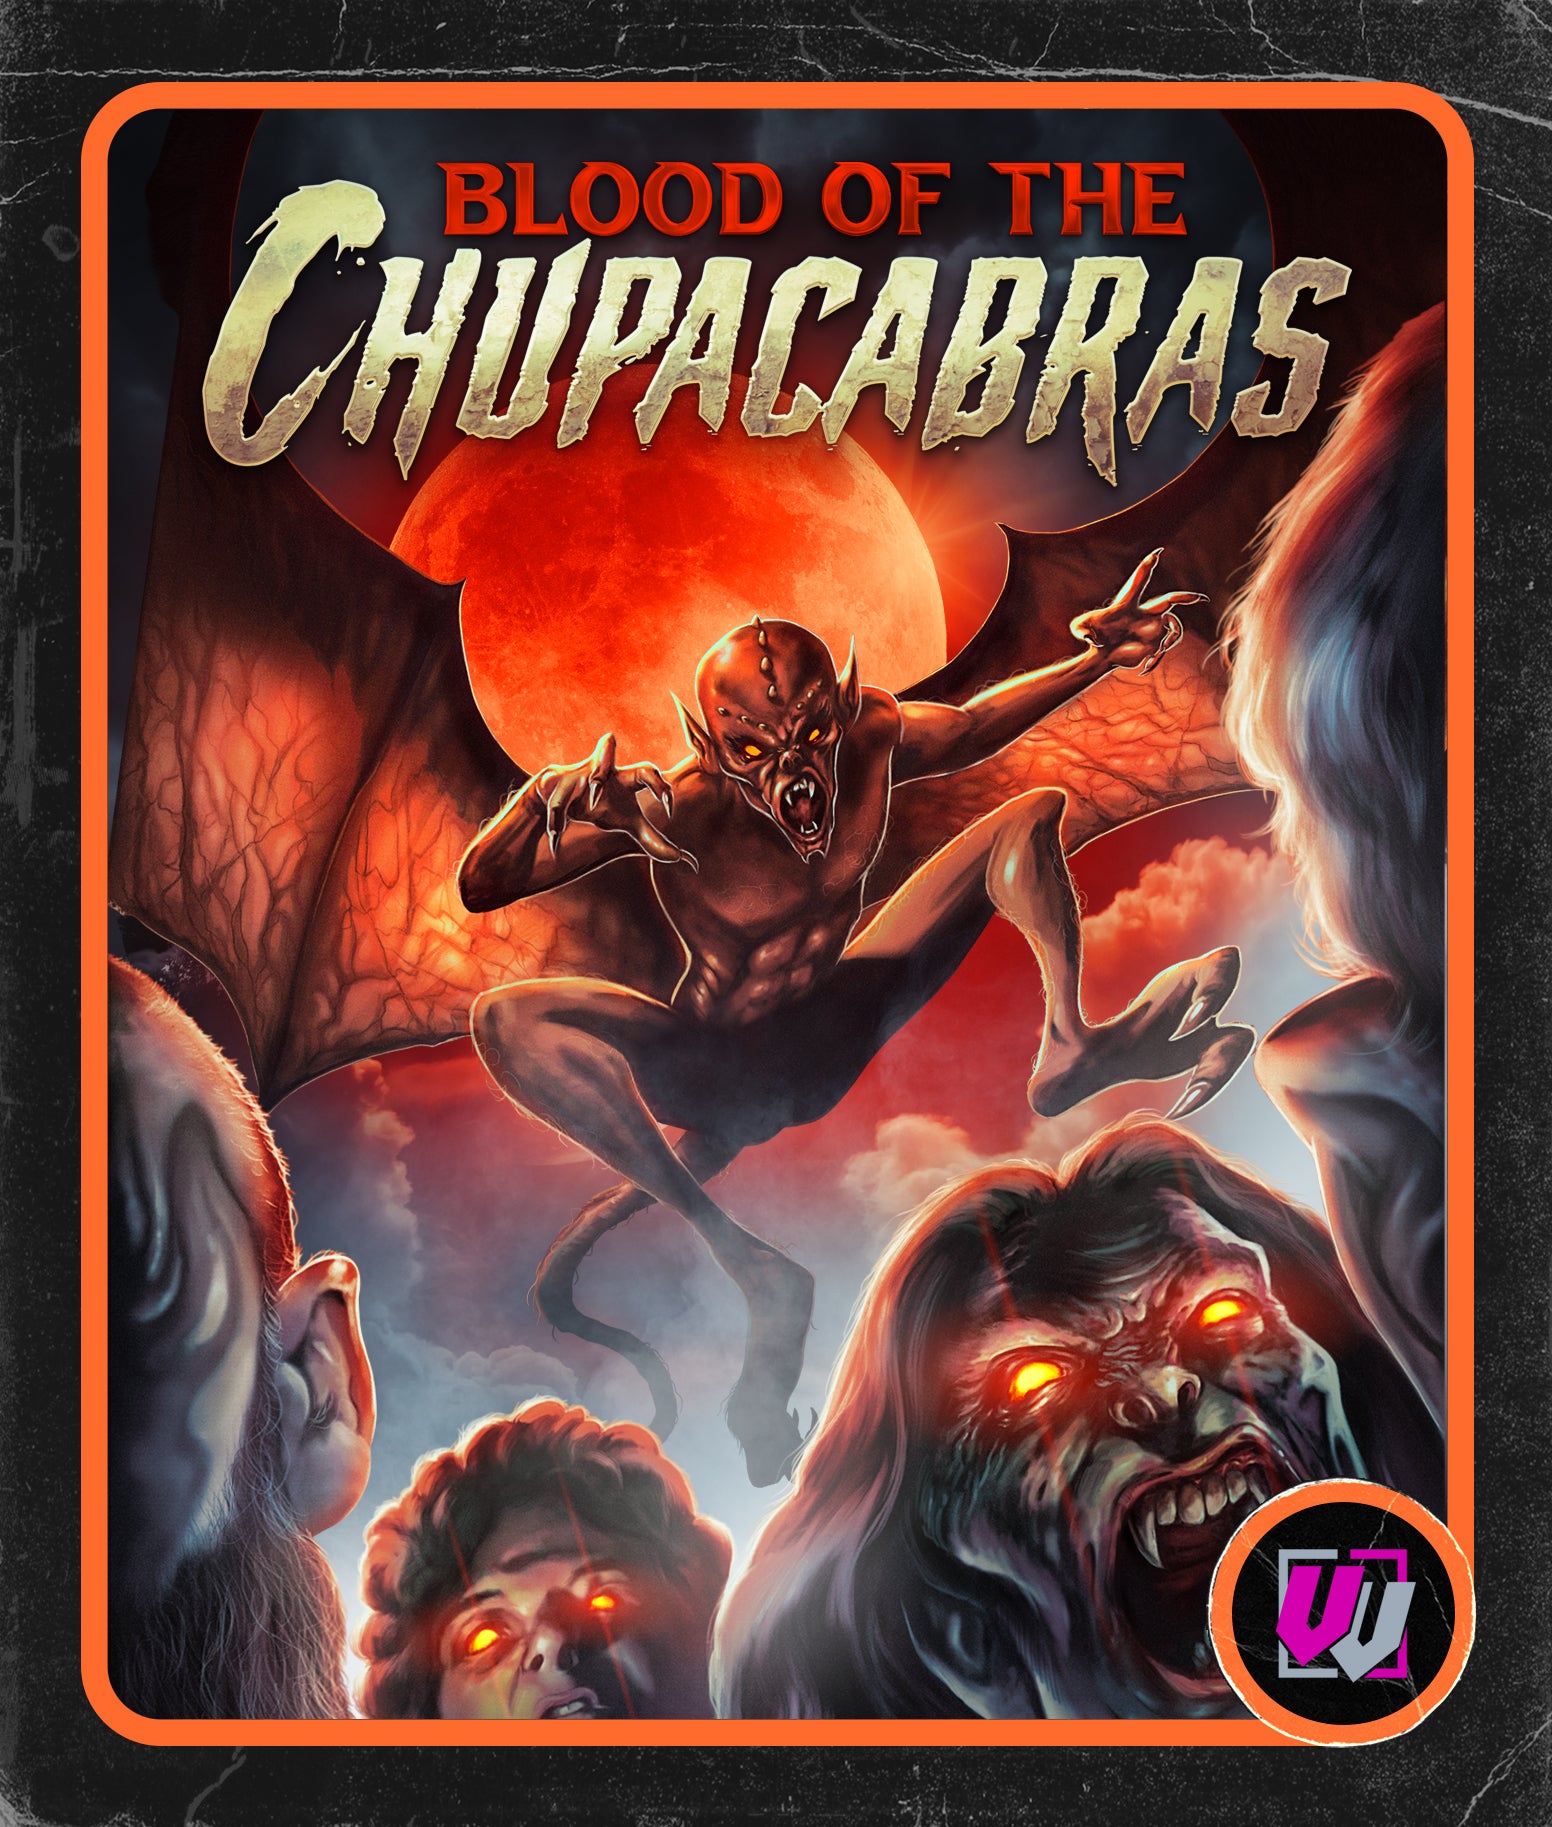 BLOOD OF THE CHUPACABRAS DOUBLE FEATURE BLU-RAY